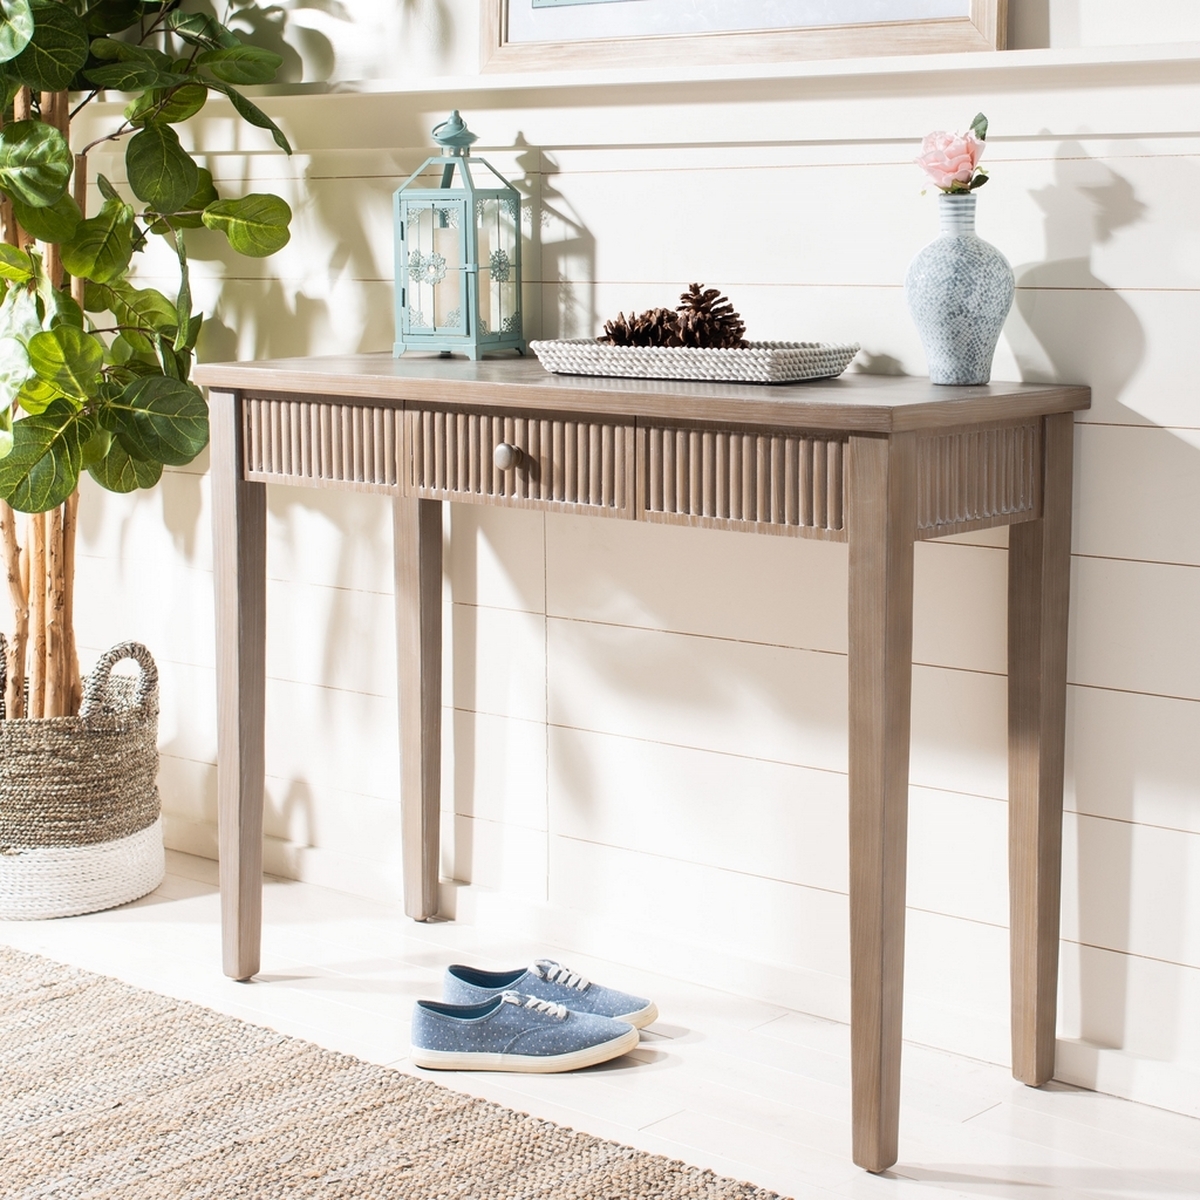 Beale Console With Storage Drawer - Grey - Safavieh - Image 1